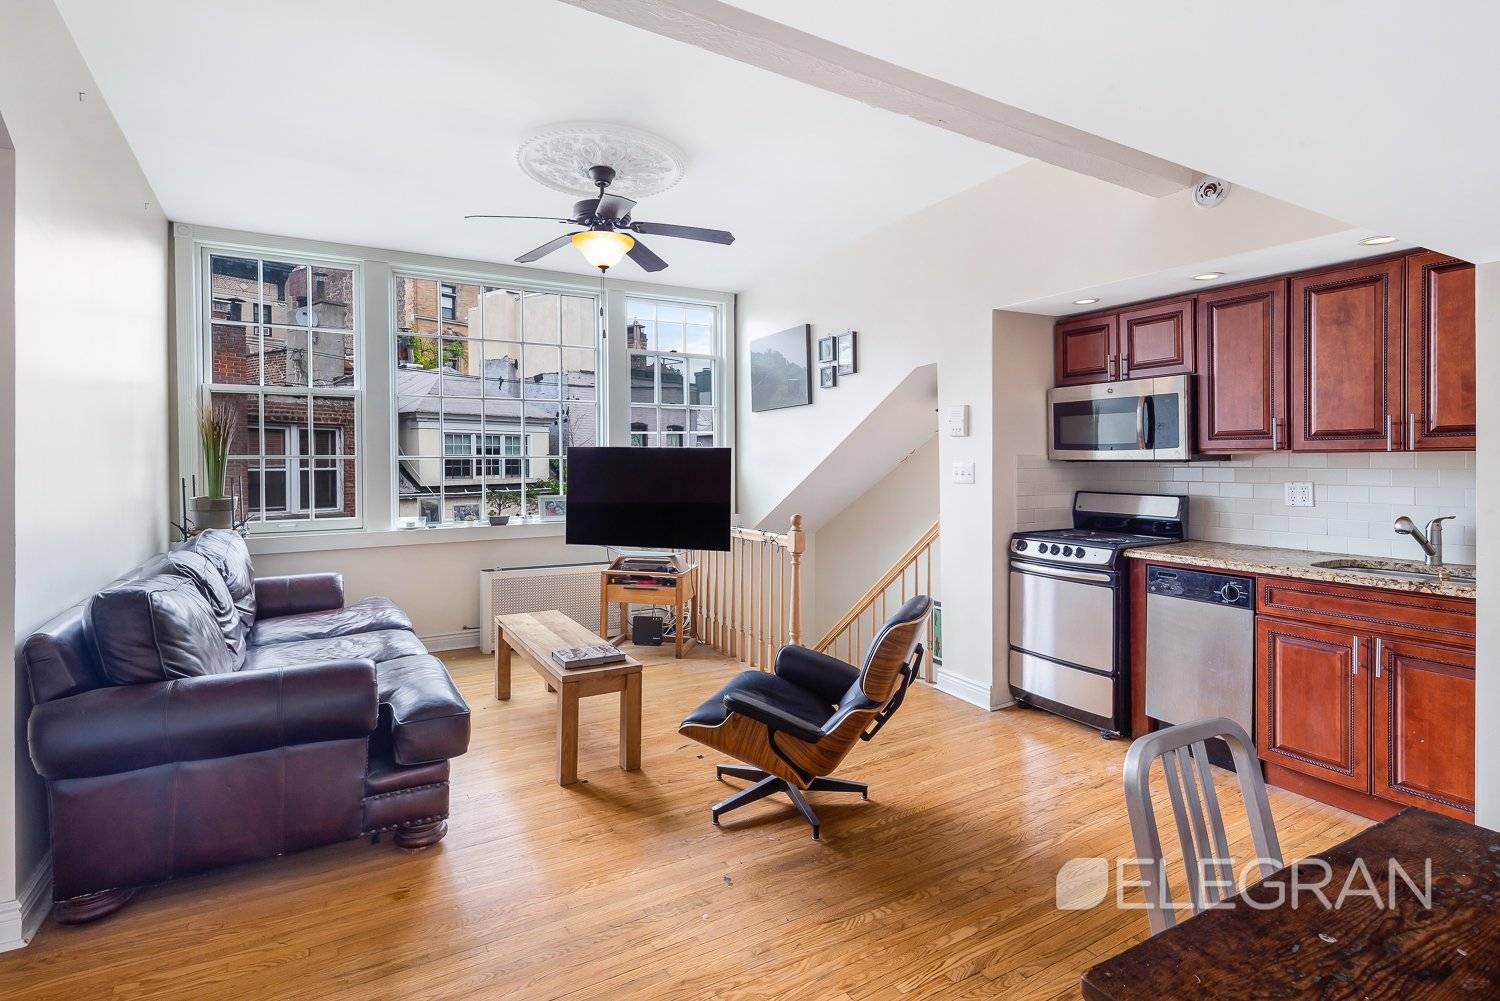 Located in arguably the best area of the West Village, this home has all of the modern conveniences while preserving it's historical charm.